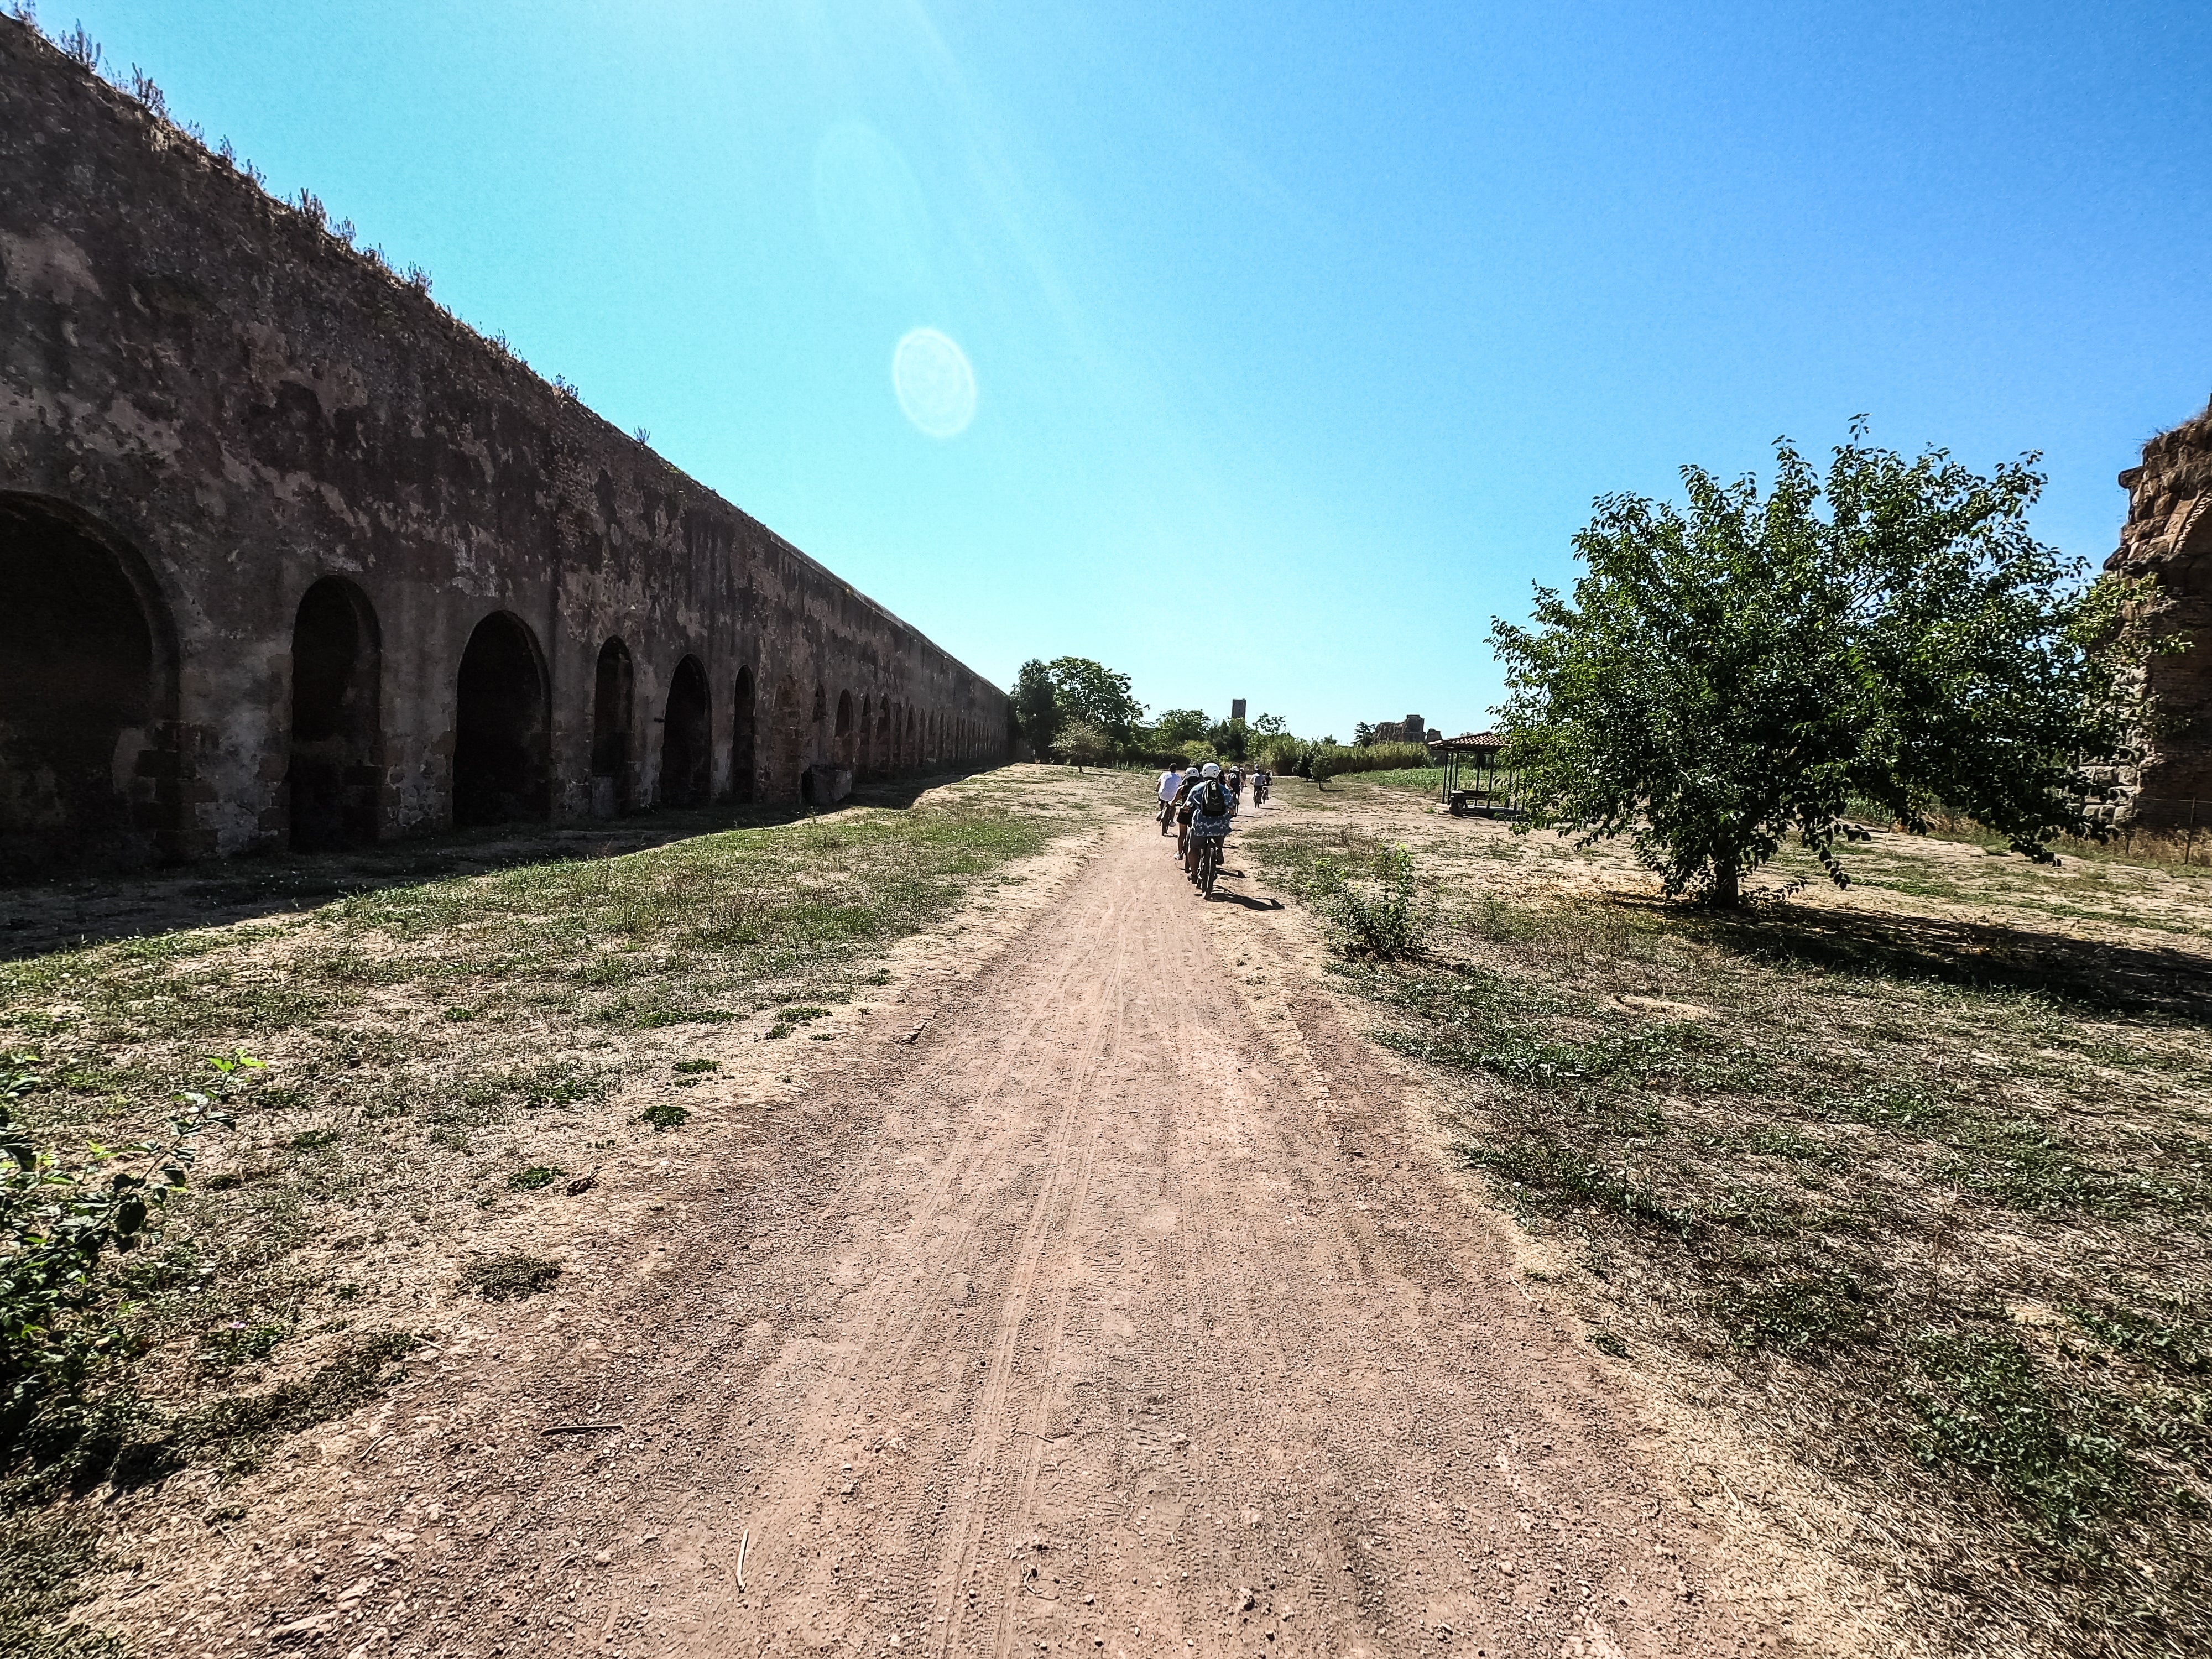 Cycle alongside an aqueduct on the original superhighway